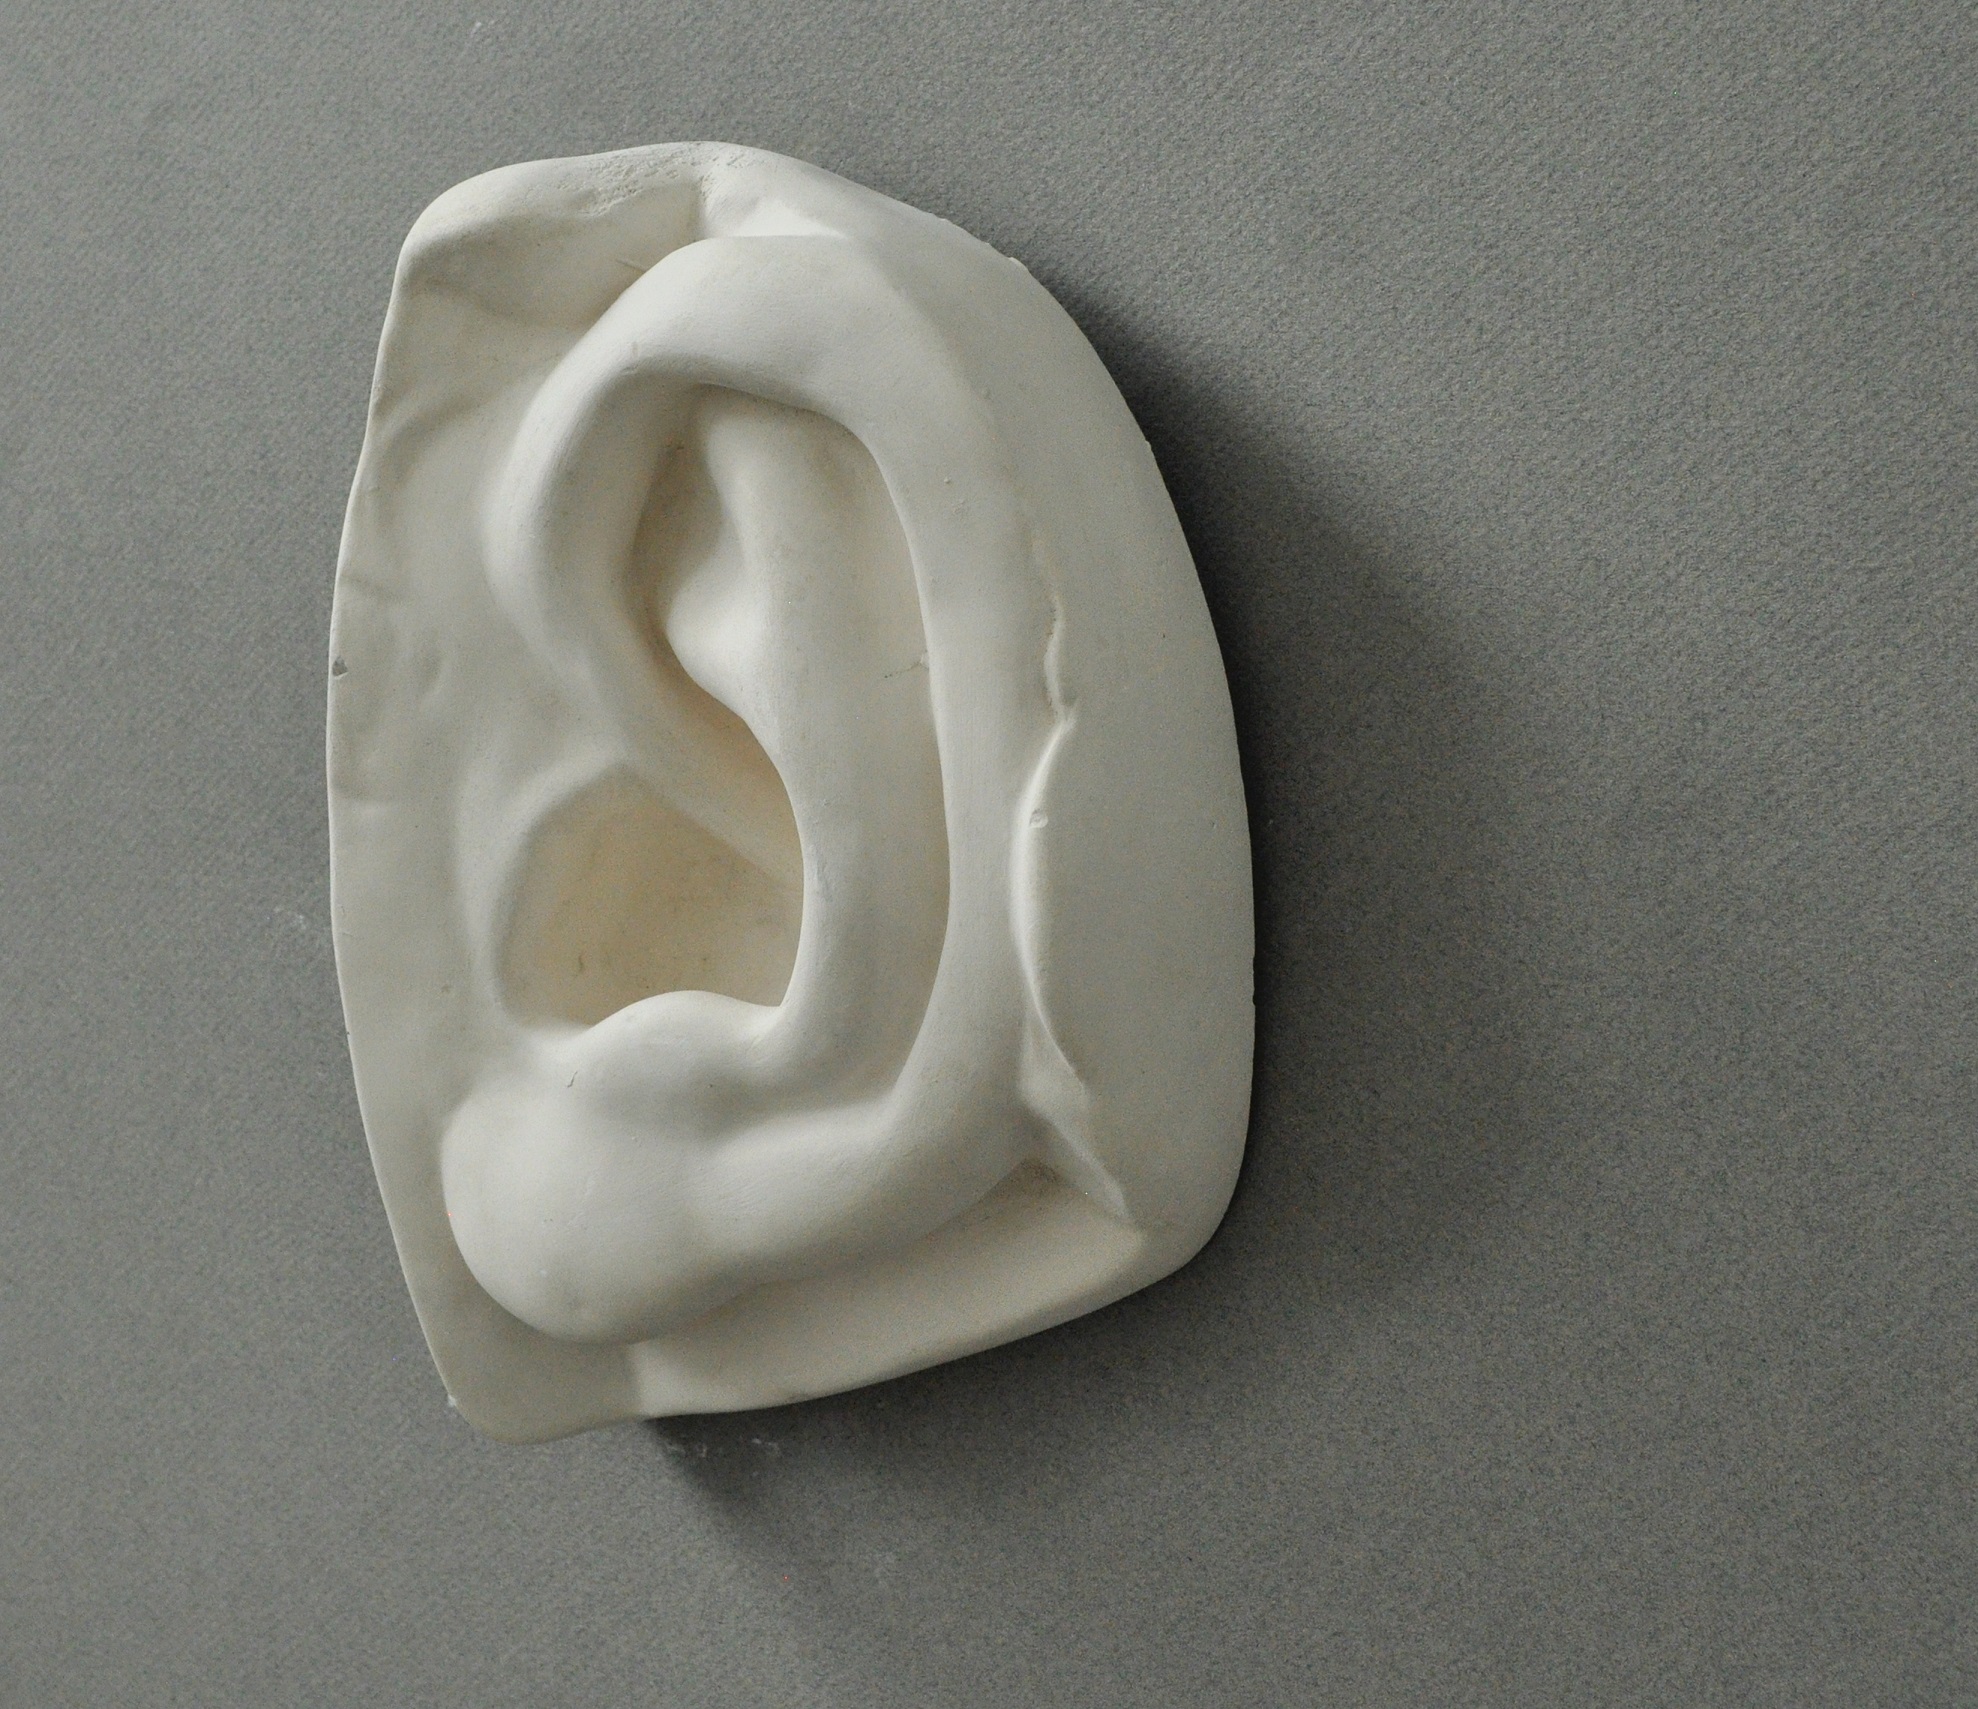 Alternative plaster cast of Michelangelos David ear from the side, used in traditional drawing courses